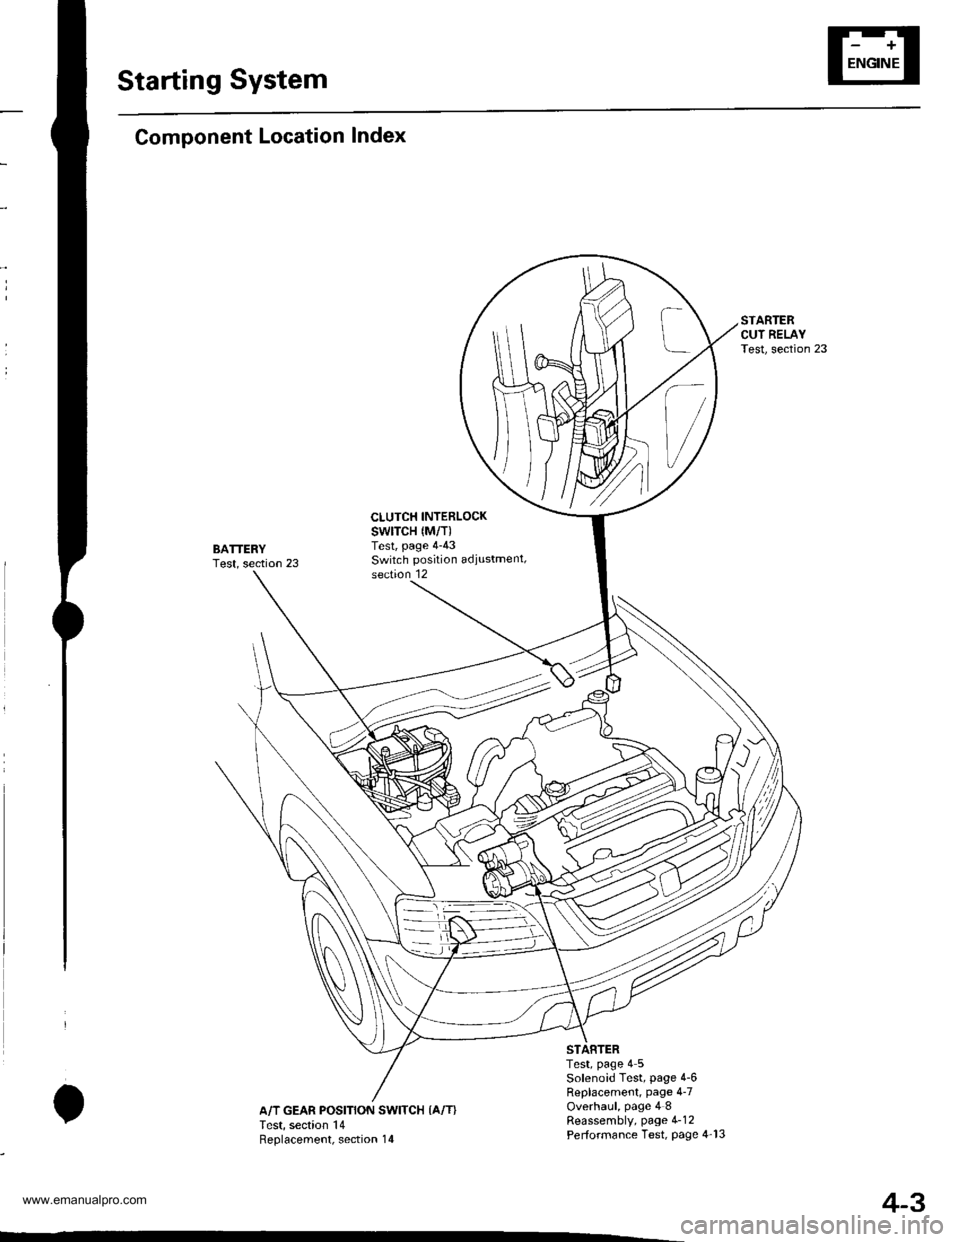 HONDA CR-V 1999 RD1-RD3 / 1.G Workshop Manual 
Starting System
Component Location Index
BATTERYTest, section 23
CLUTCH INTERLOCKswtTcH {M/T)Test, page 4-43Switch position adiustment,section 12
IA/T GEAR POSITION SWITCH {A/T}Test, section 14Reolac